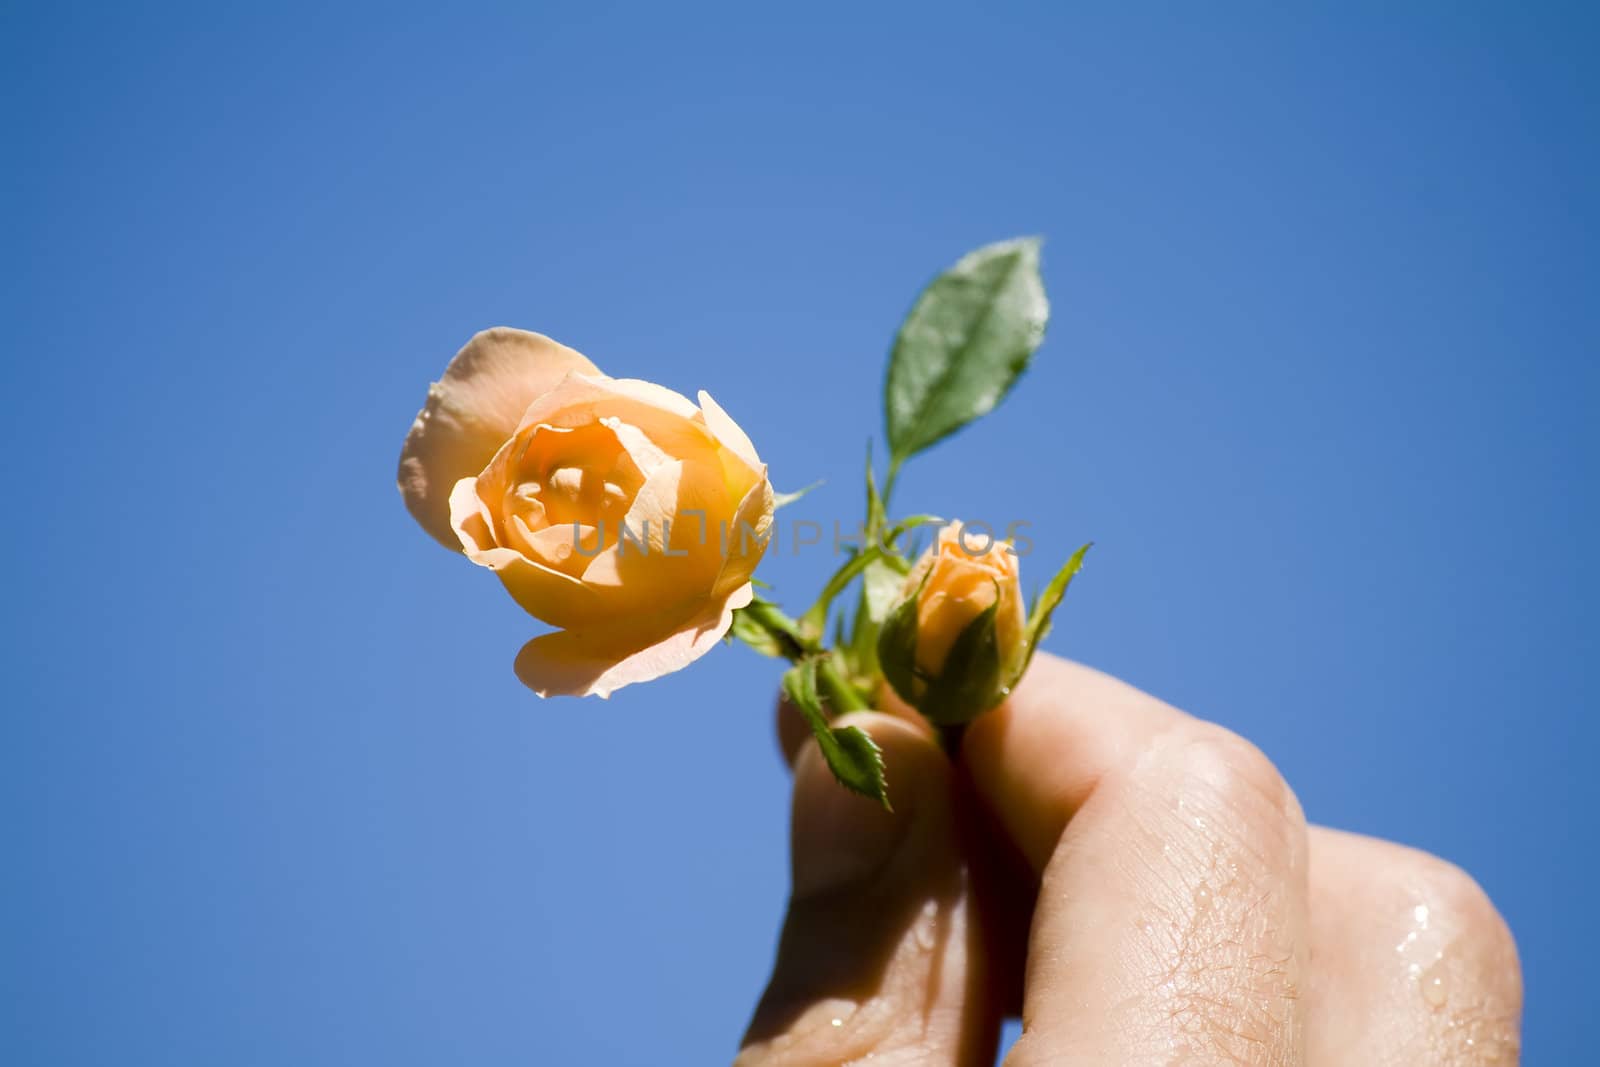 hand holding two roses against blue sky